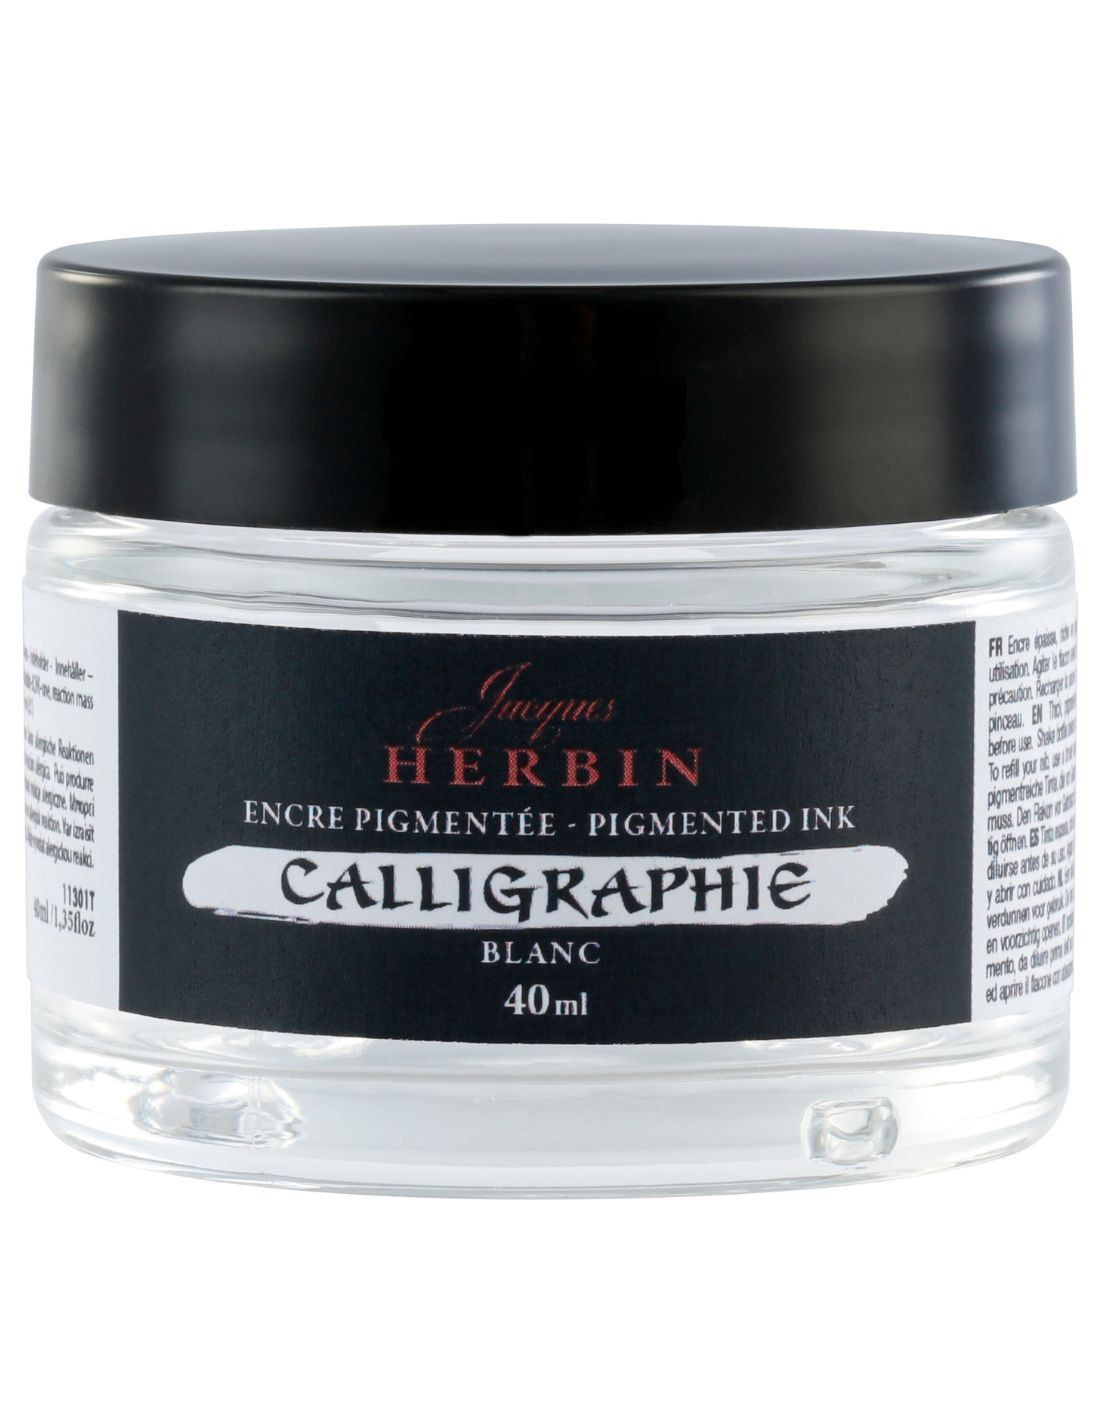 Jacques Herbin Pigmented Calligraphy Ink - Blanc - White - 40ml Bottle